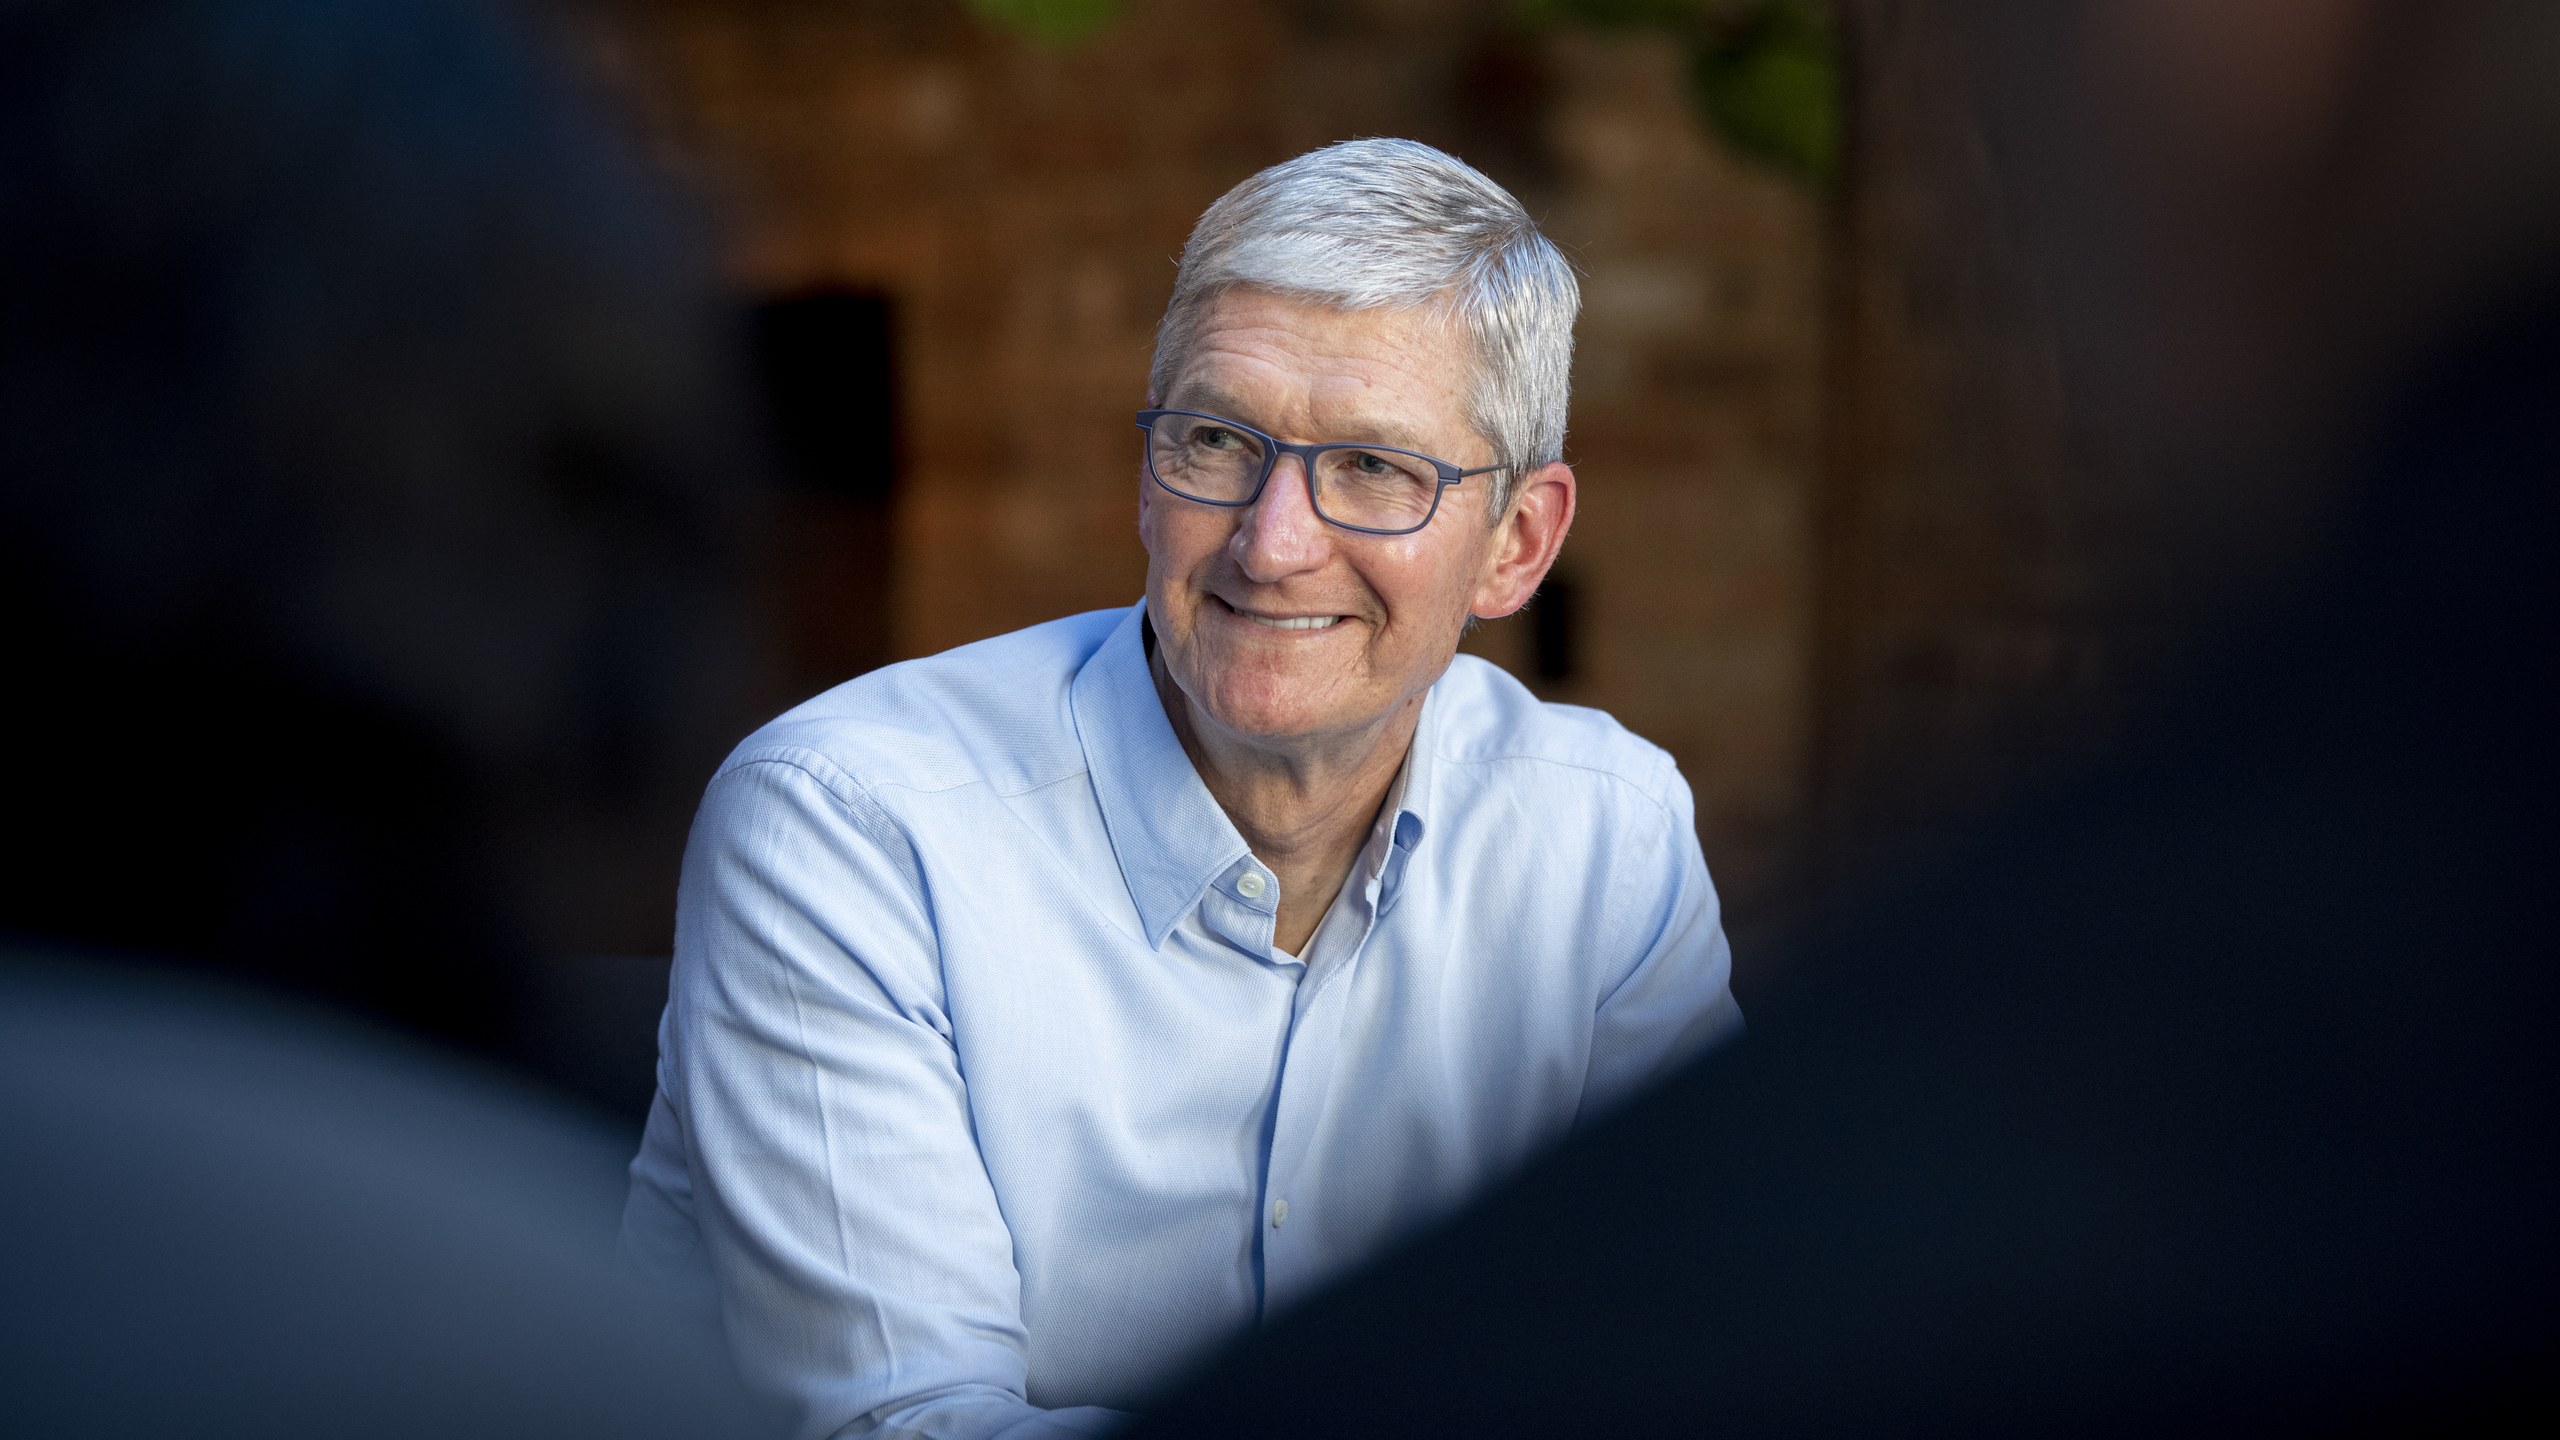 Tim Cook Wallpapers